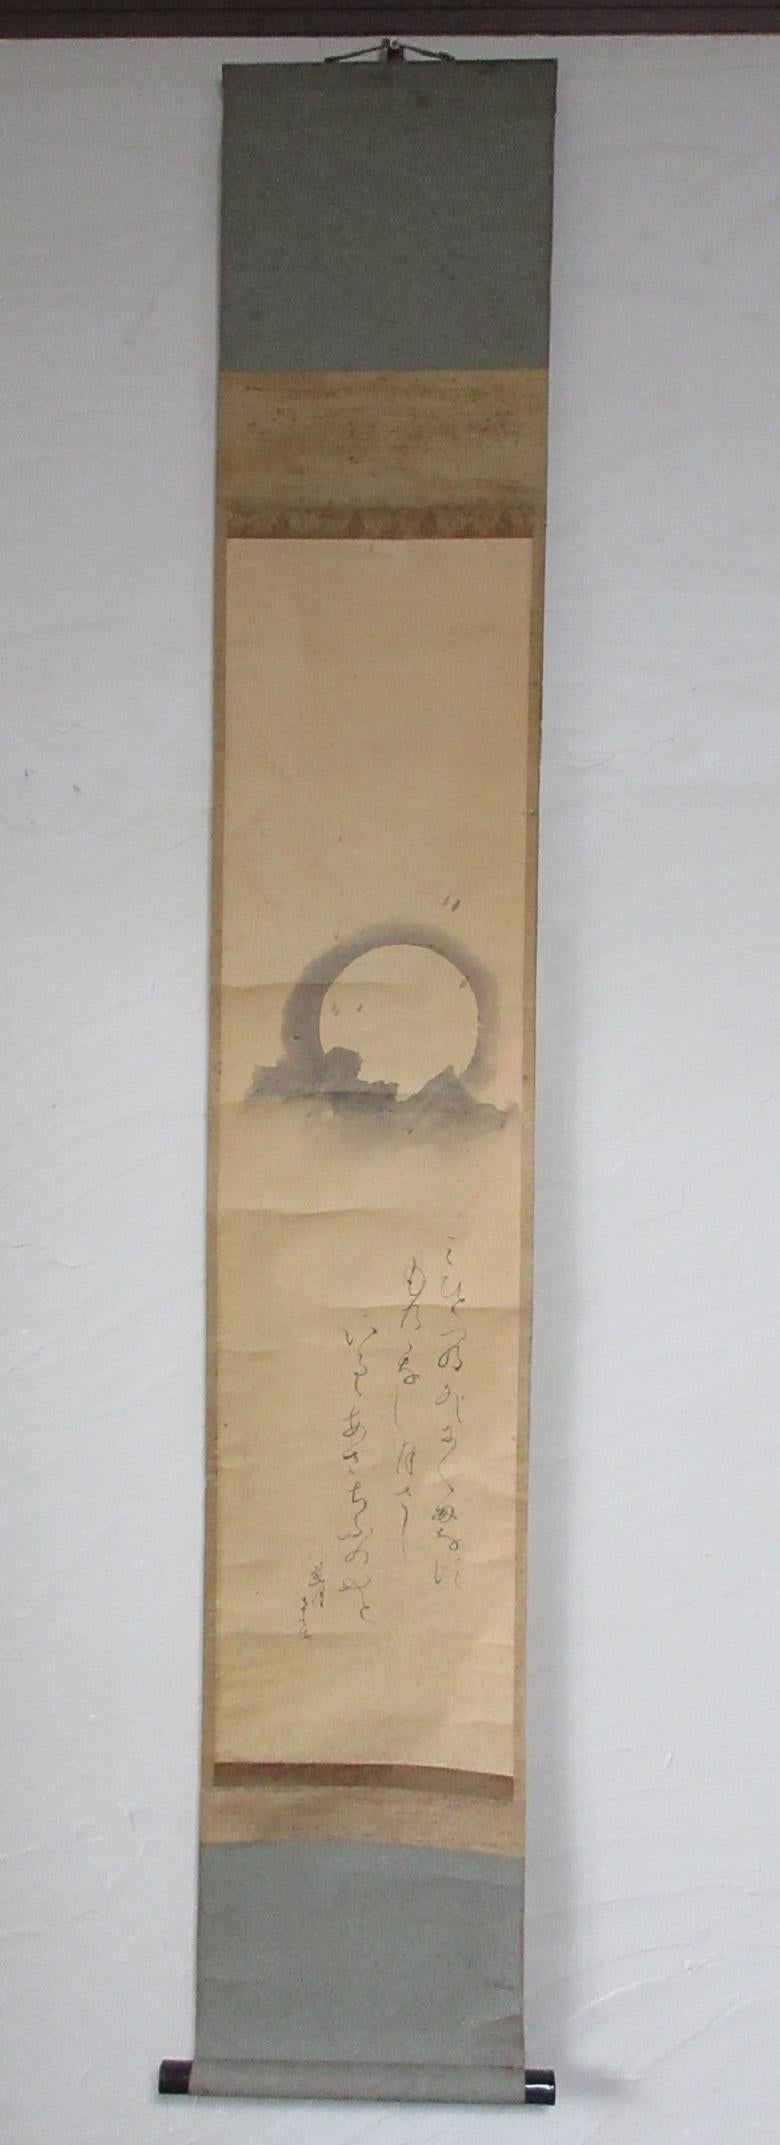 Japan, a rare paper scroll hand painted by renown Rengetsu Otagaki (1791-1875).  She was a very famous nun in old Japan and being familiar with poetry, her Waka poems on paper, and especially her hard to find scrolls are sought after through out the